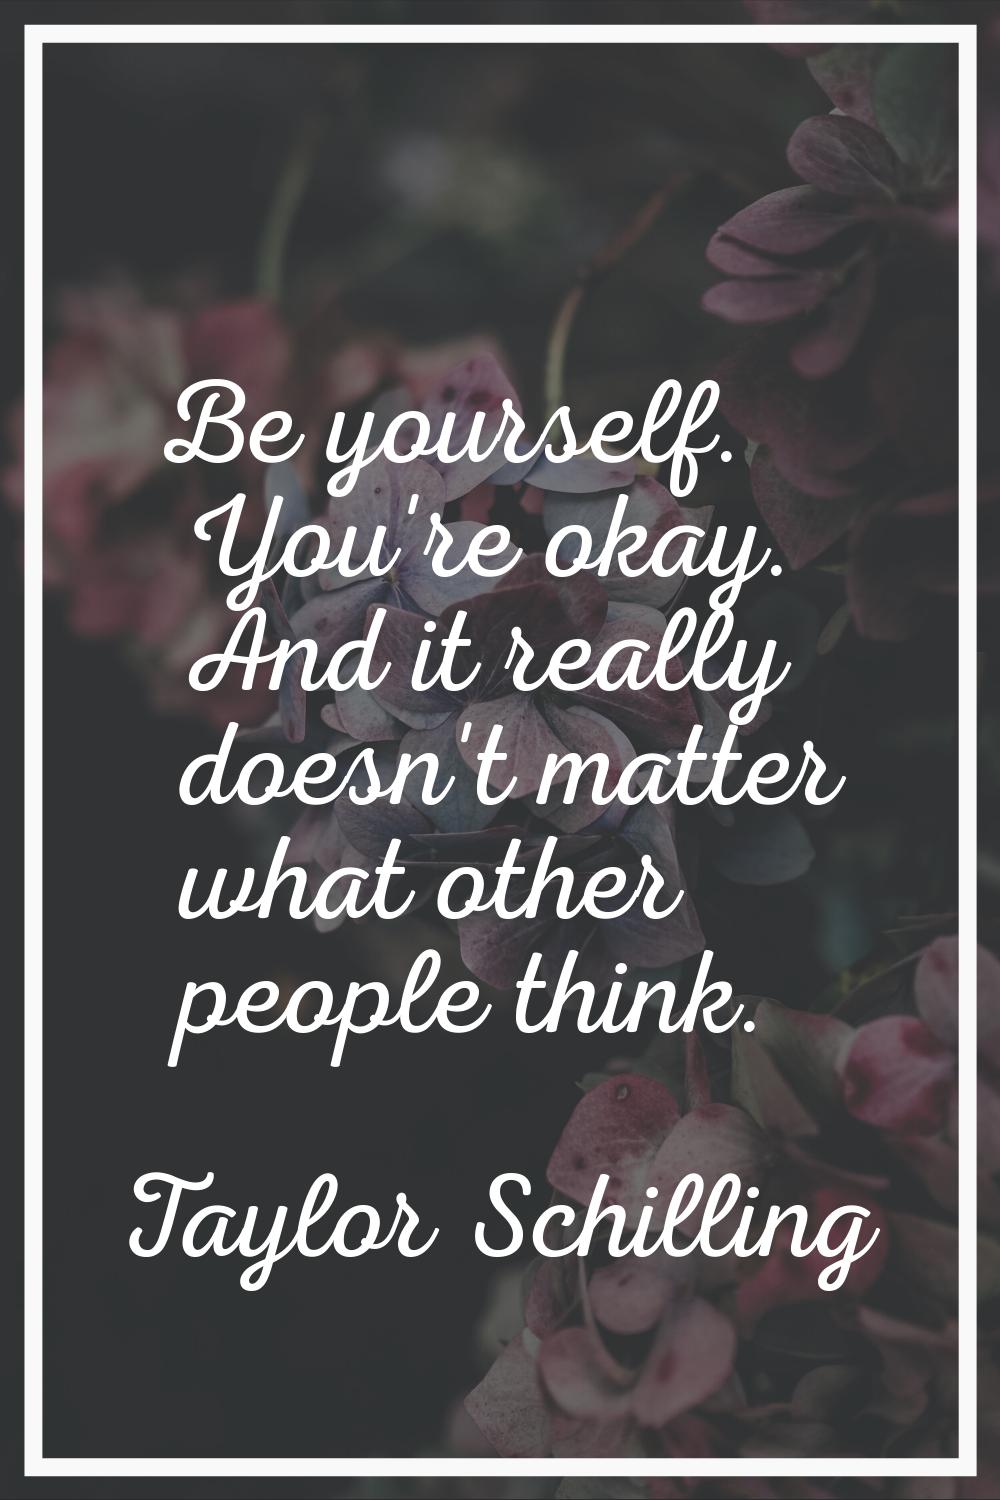 Be yourself. You're okay. And it really doesn't matter what other people think.